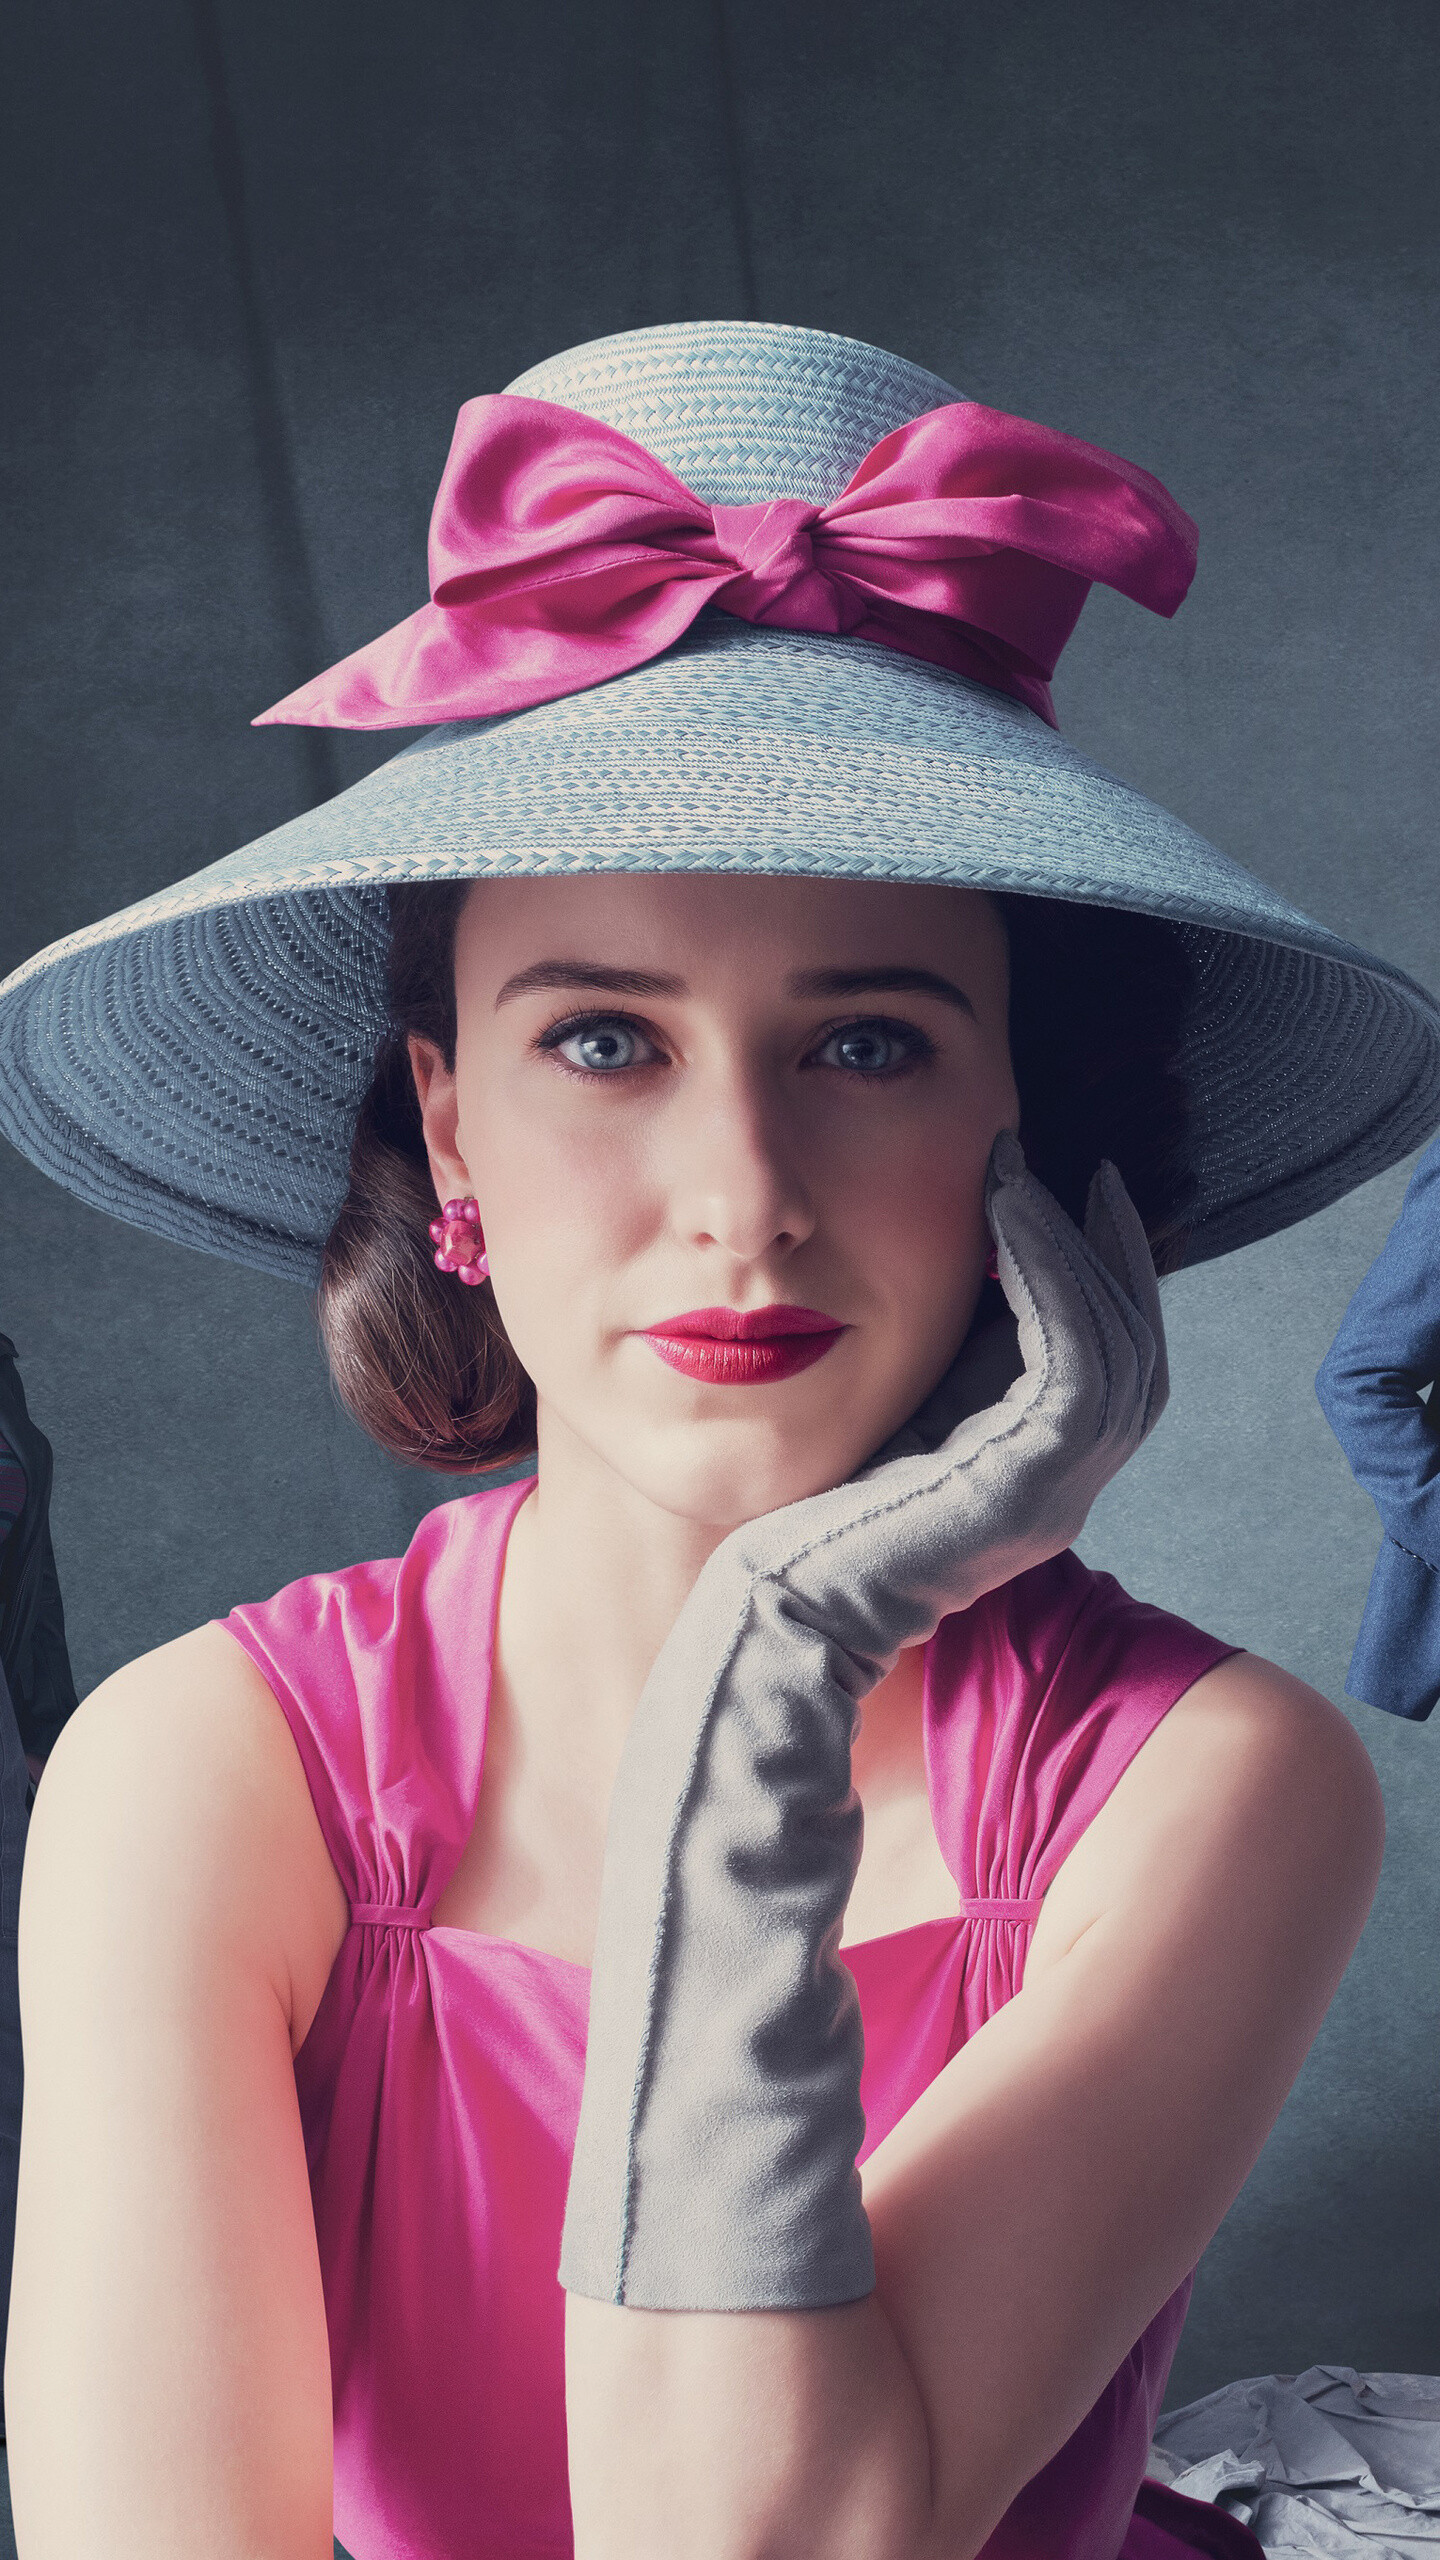 The Marvelous Mrs. Maisel: The series set in the late 1950s and early 1960s, and stars Rachel Brosnahan. 1440x2560 HD Wallpaper.